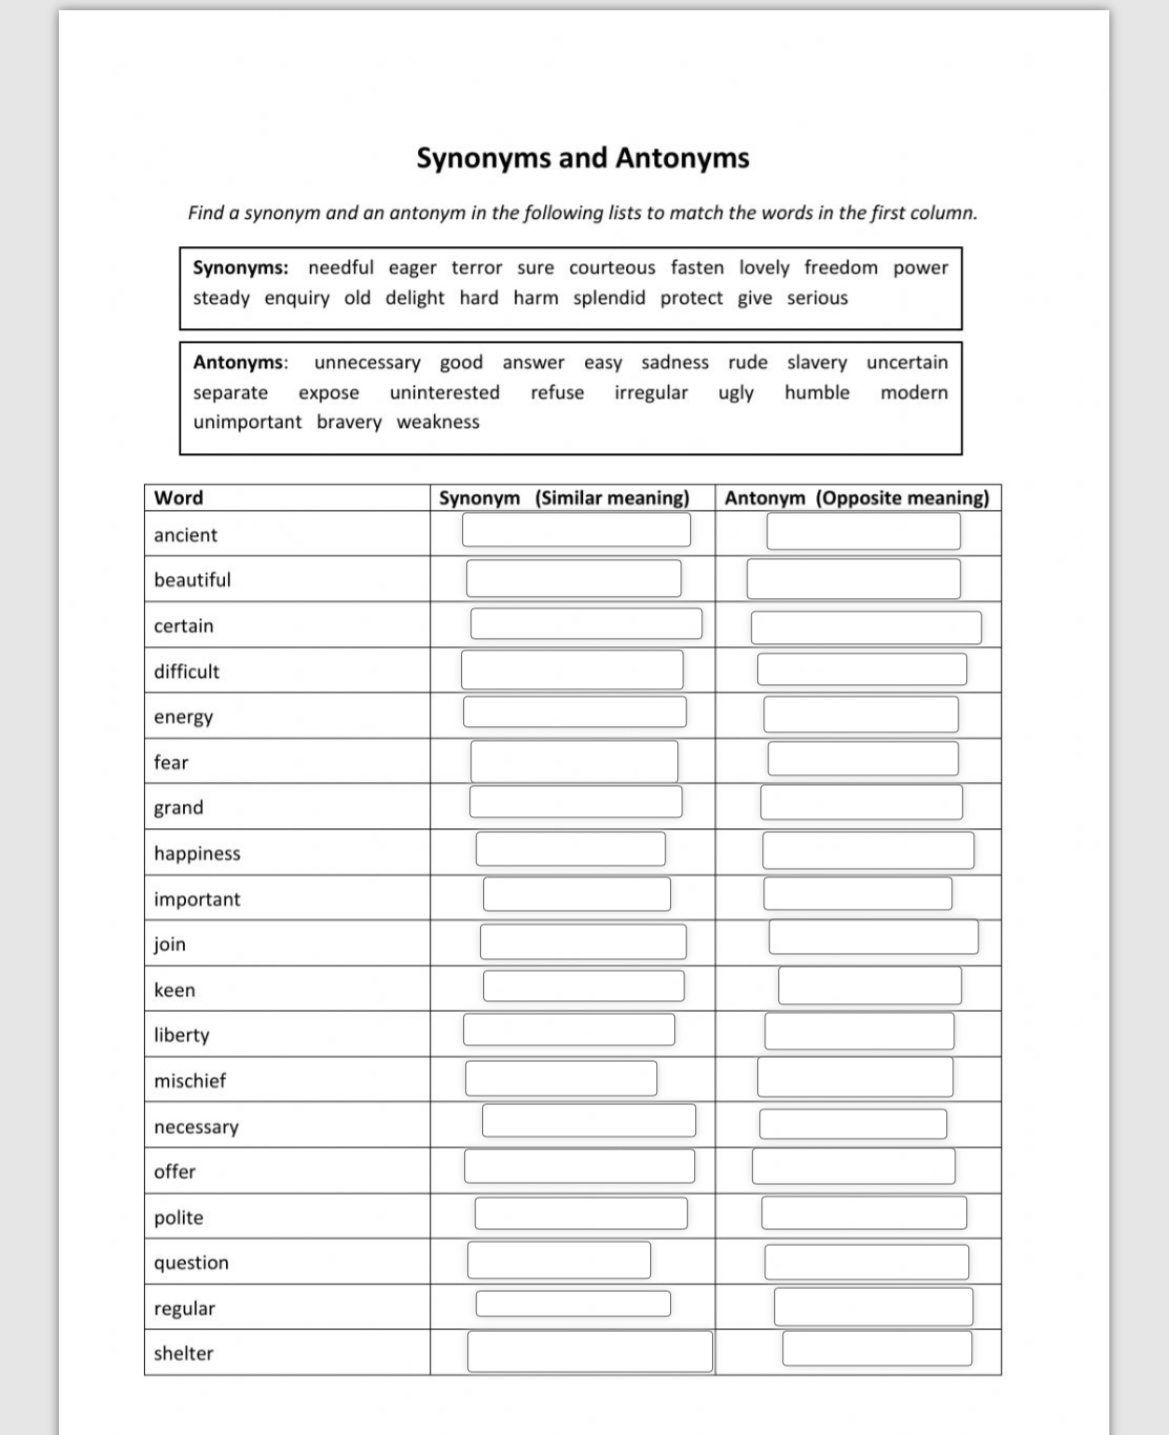 Synonyms and antonyms worksheet -1FC0E686-6278-47F0-A4DB-D6A8E5529CCA.jpeg